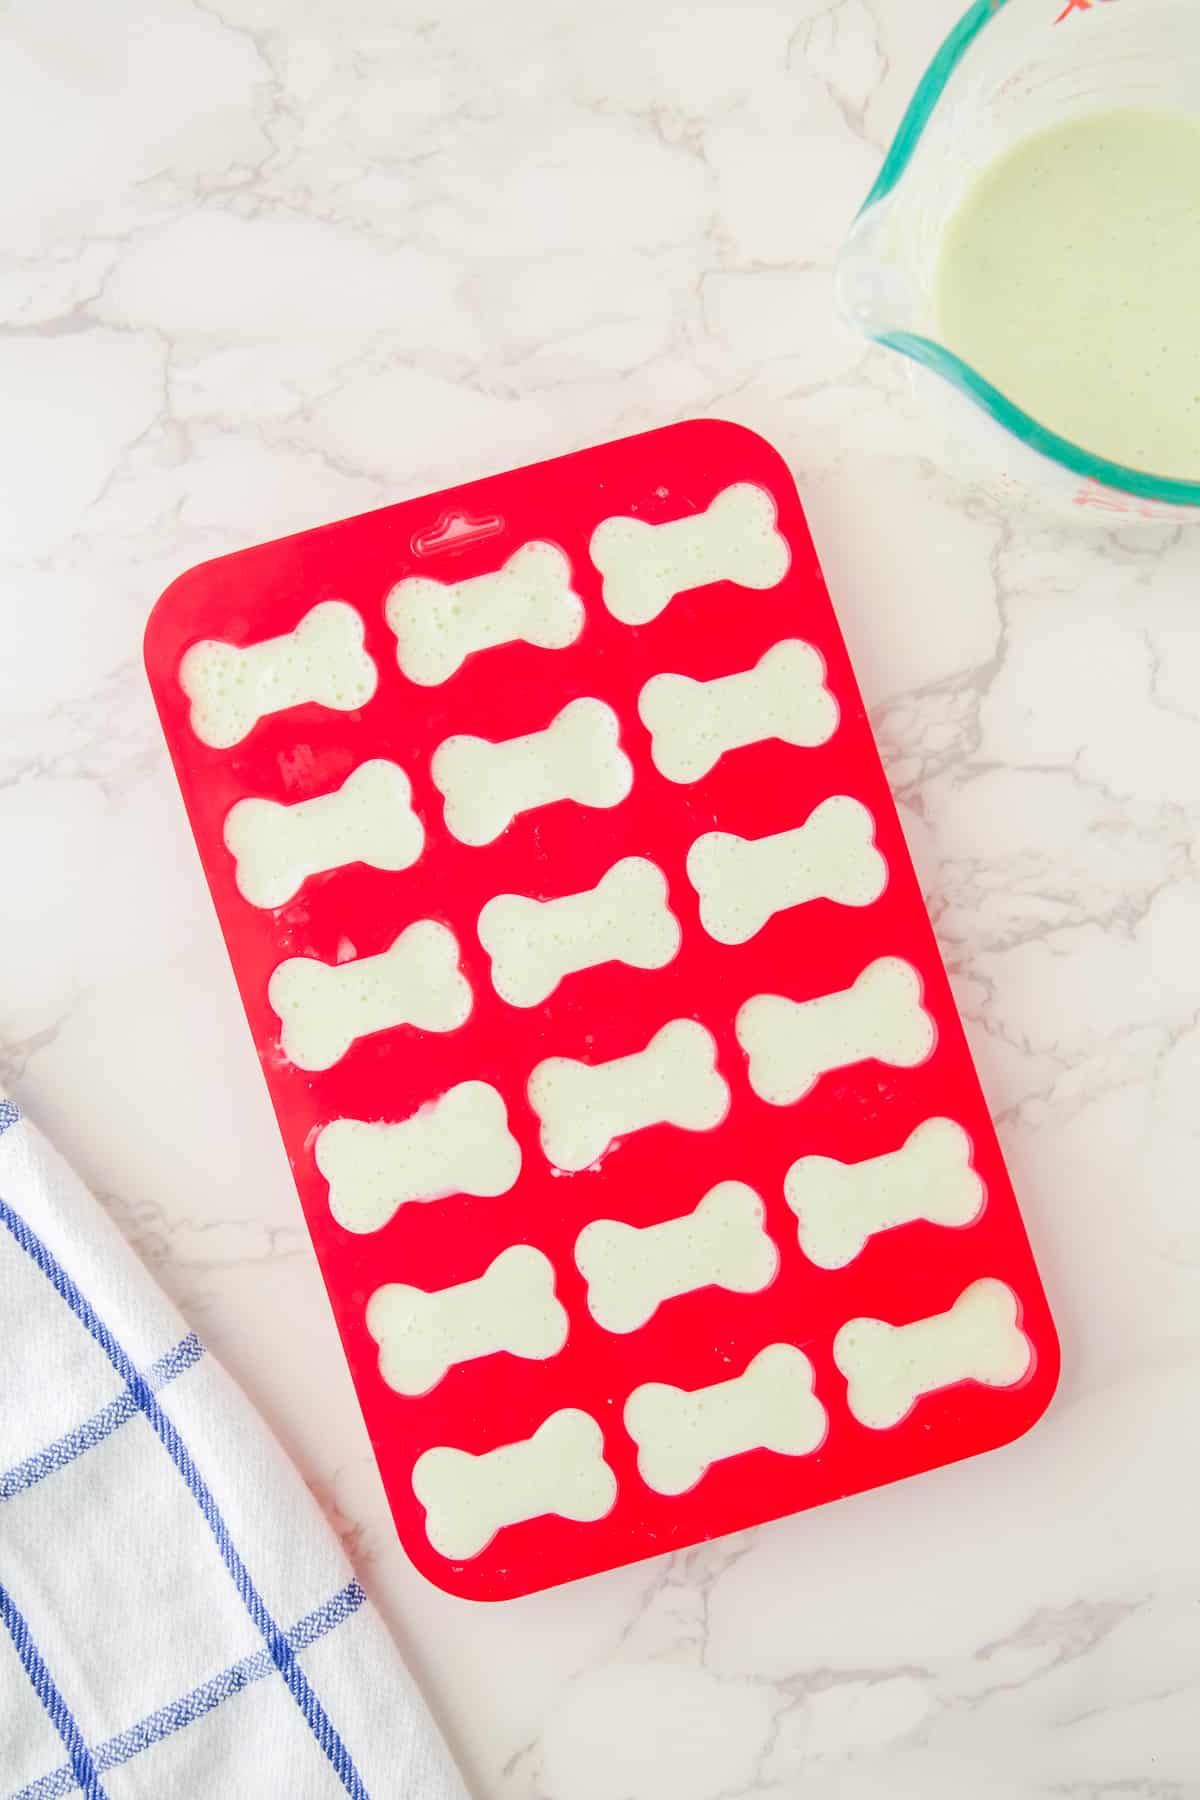 A red bone-shaped silicone mold filled with yogurt cumber mixture from above.